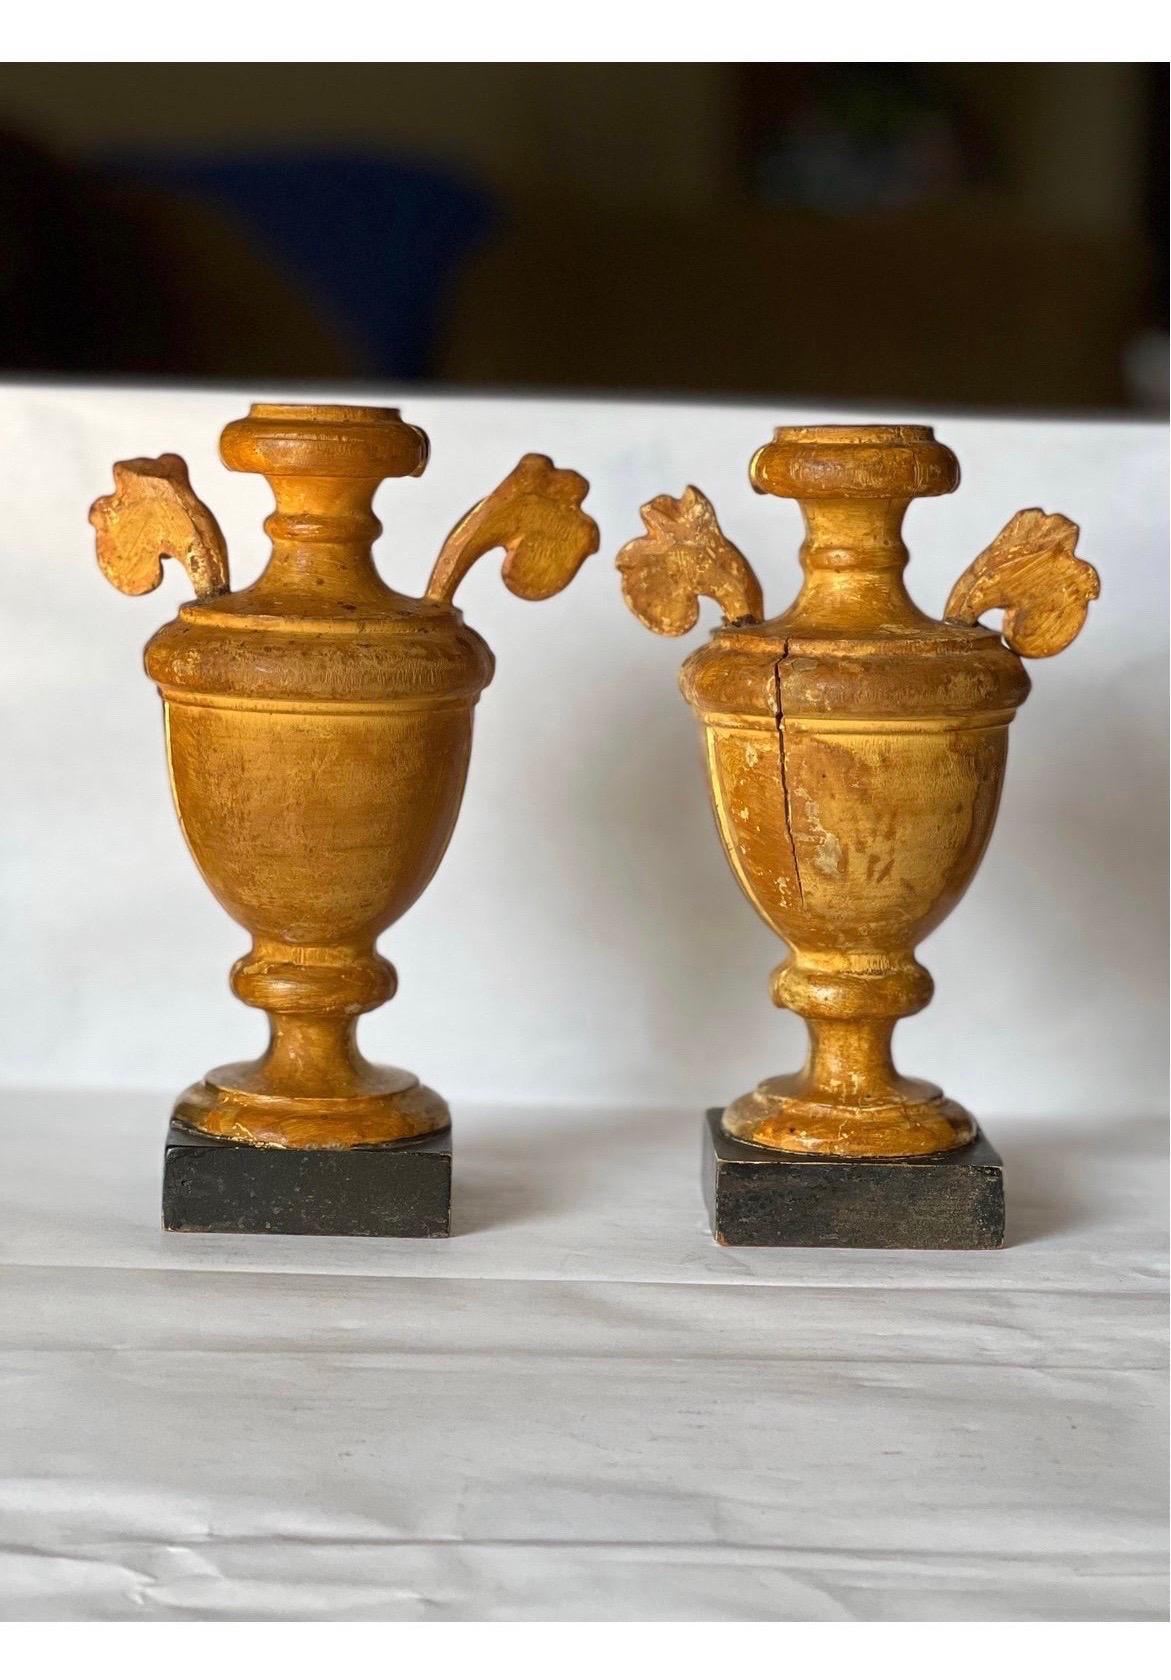 A beautiful pair of antique likely circa 1900 Italian Gilt wood ornamental urns with carved and fluted bodies, foliate handles which rest on faux marble bases. No marks. Tops with holes - as shown.